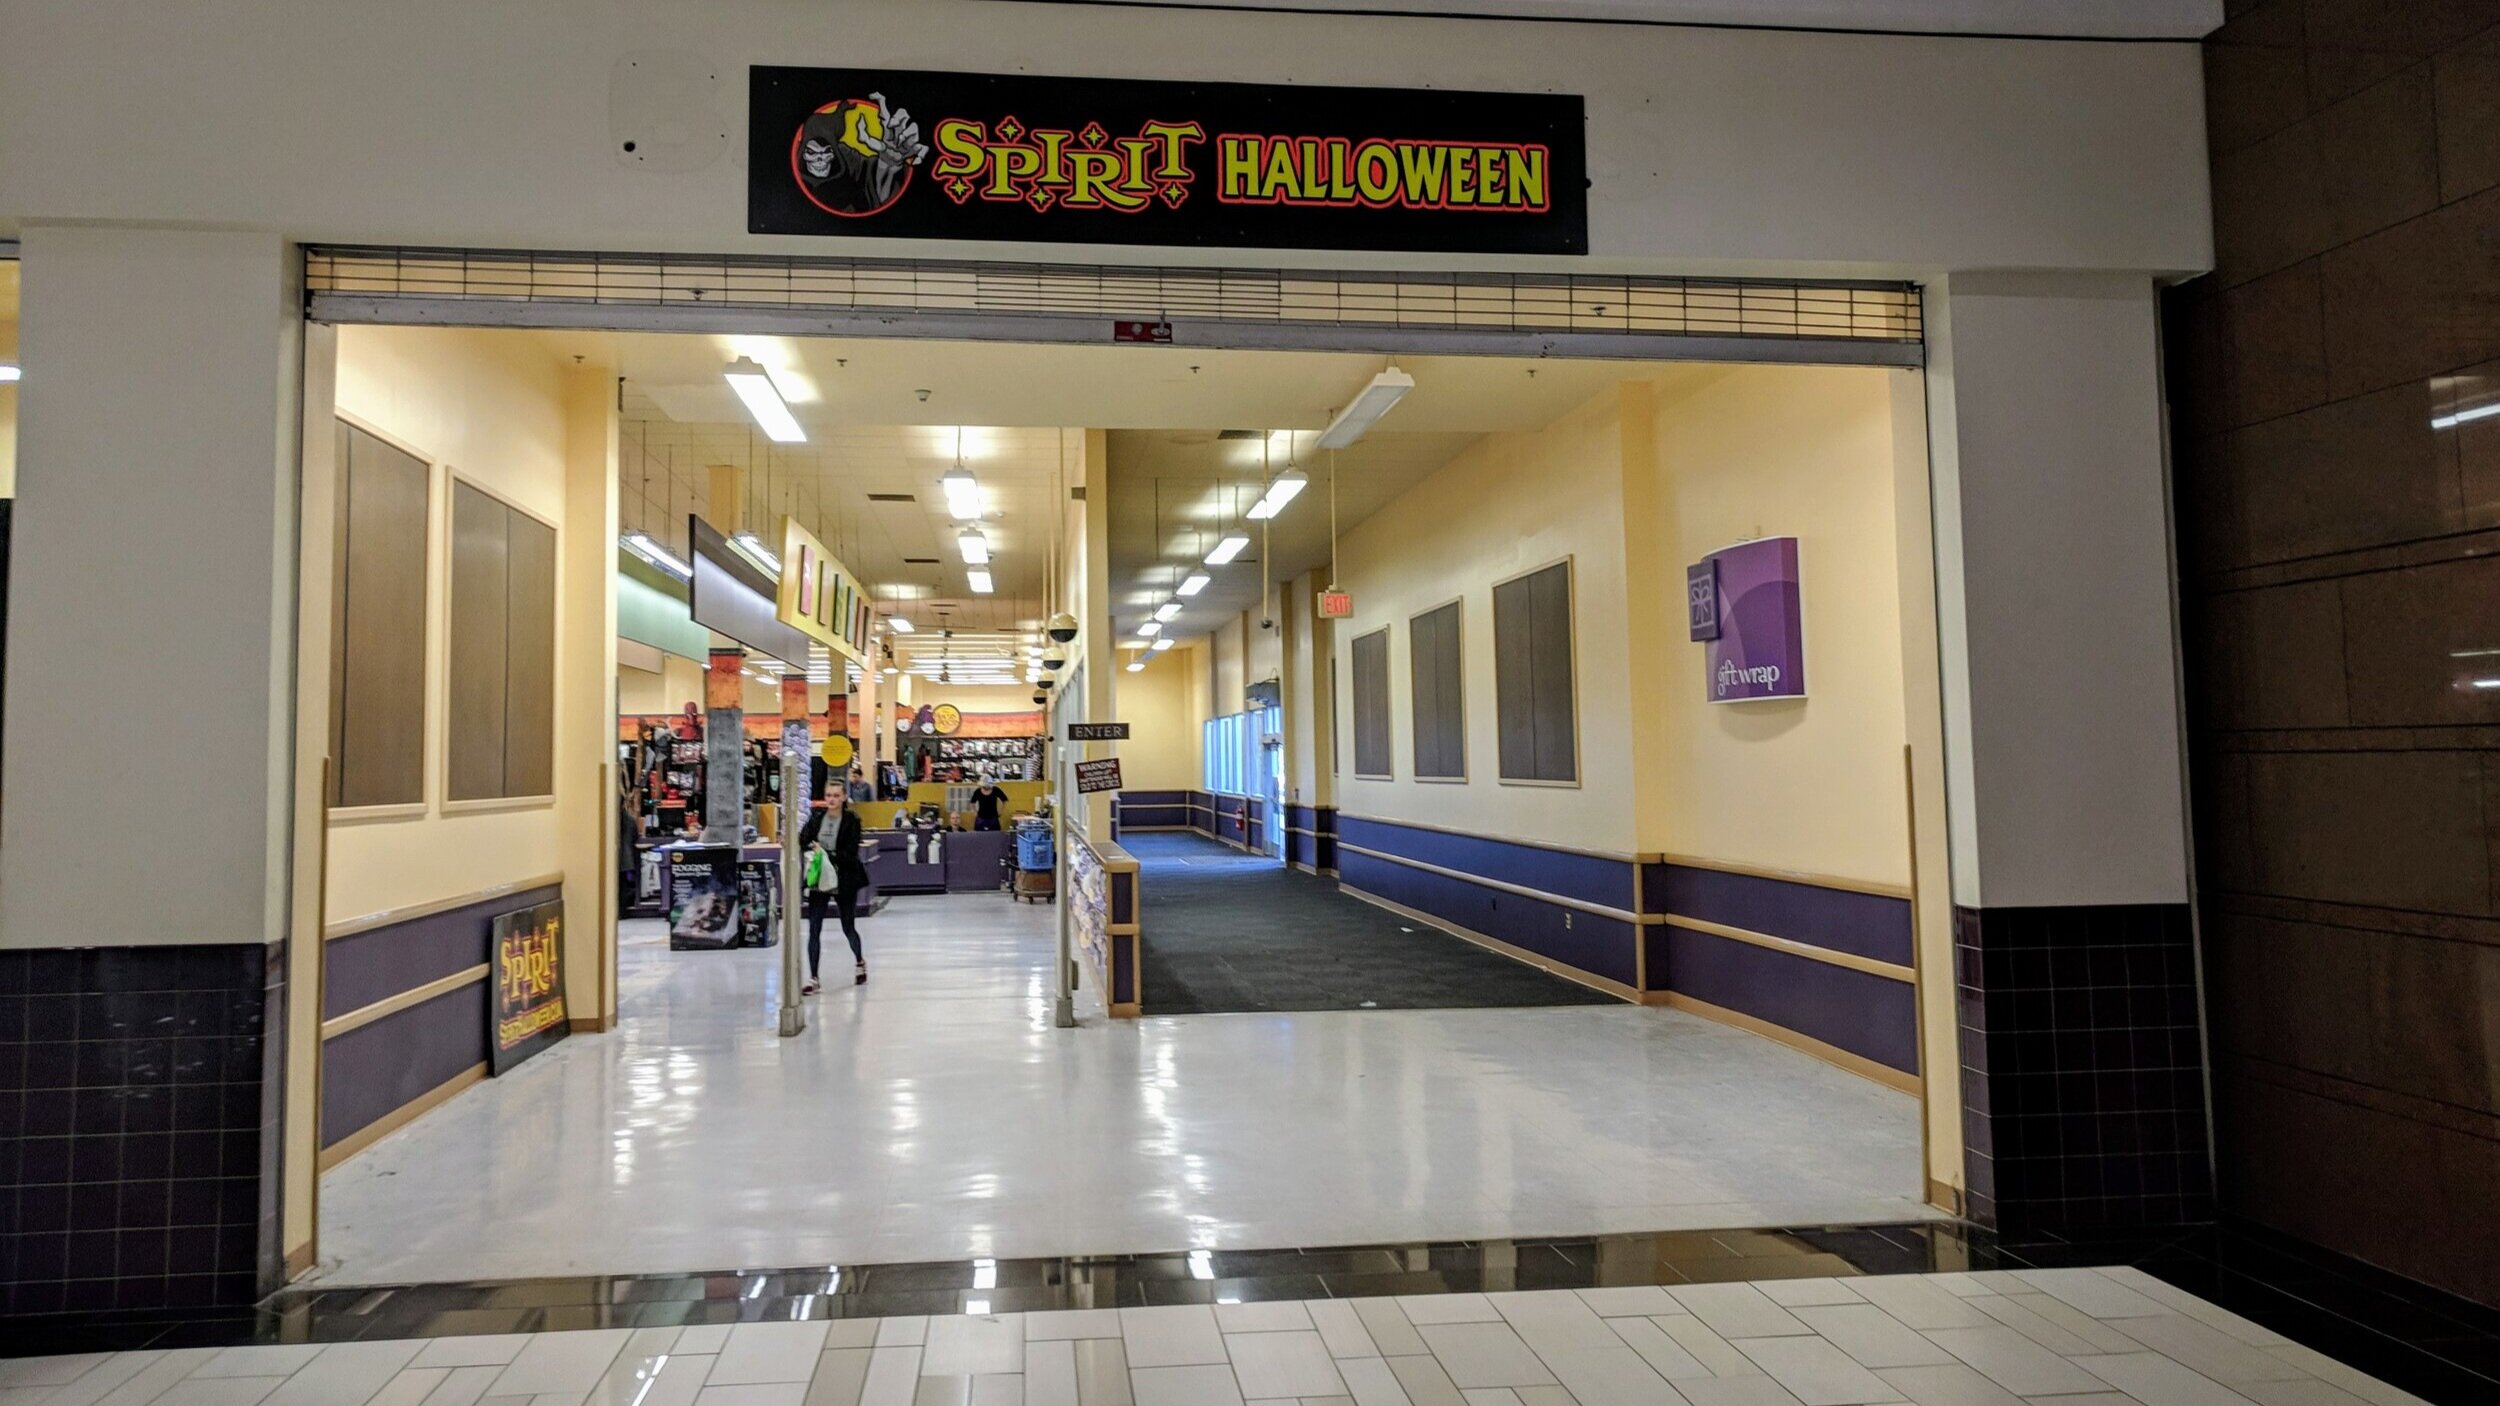 About that Spirit Halloween Store You Always See Around This Time of